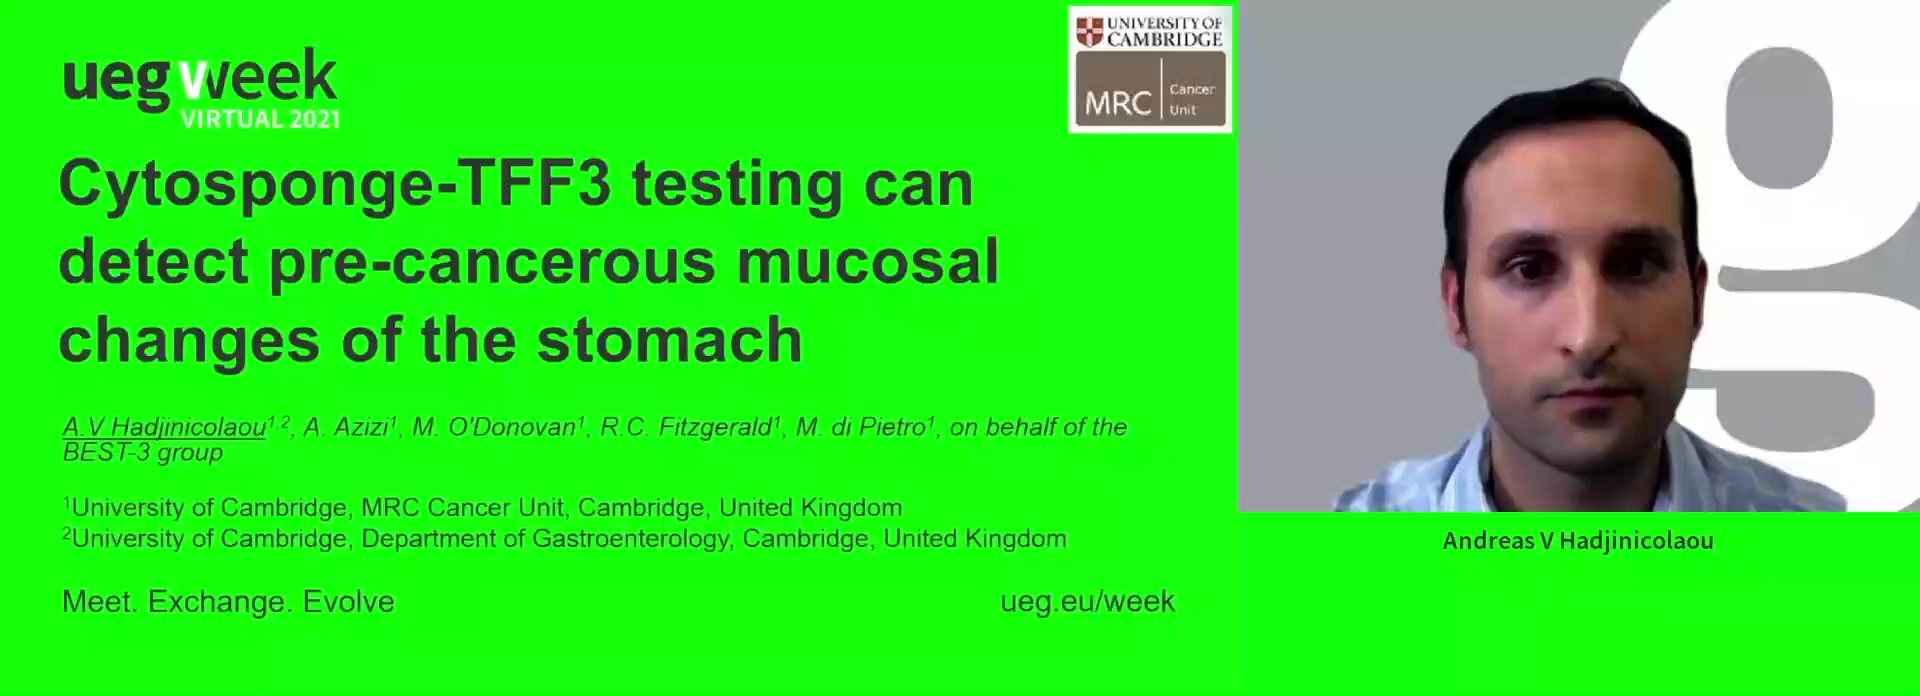 CYTOSPONGE-TFF3 TESTING CAN DETECT PRE-CANCEROUS MUCOSAL CHANGES OF THE STOMACH